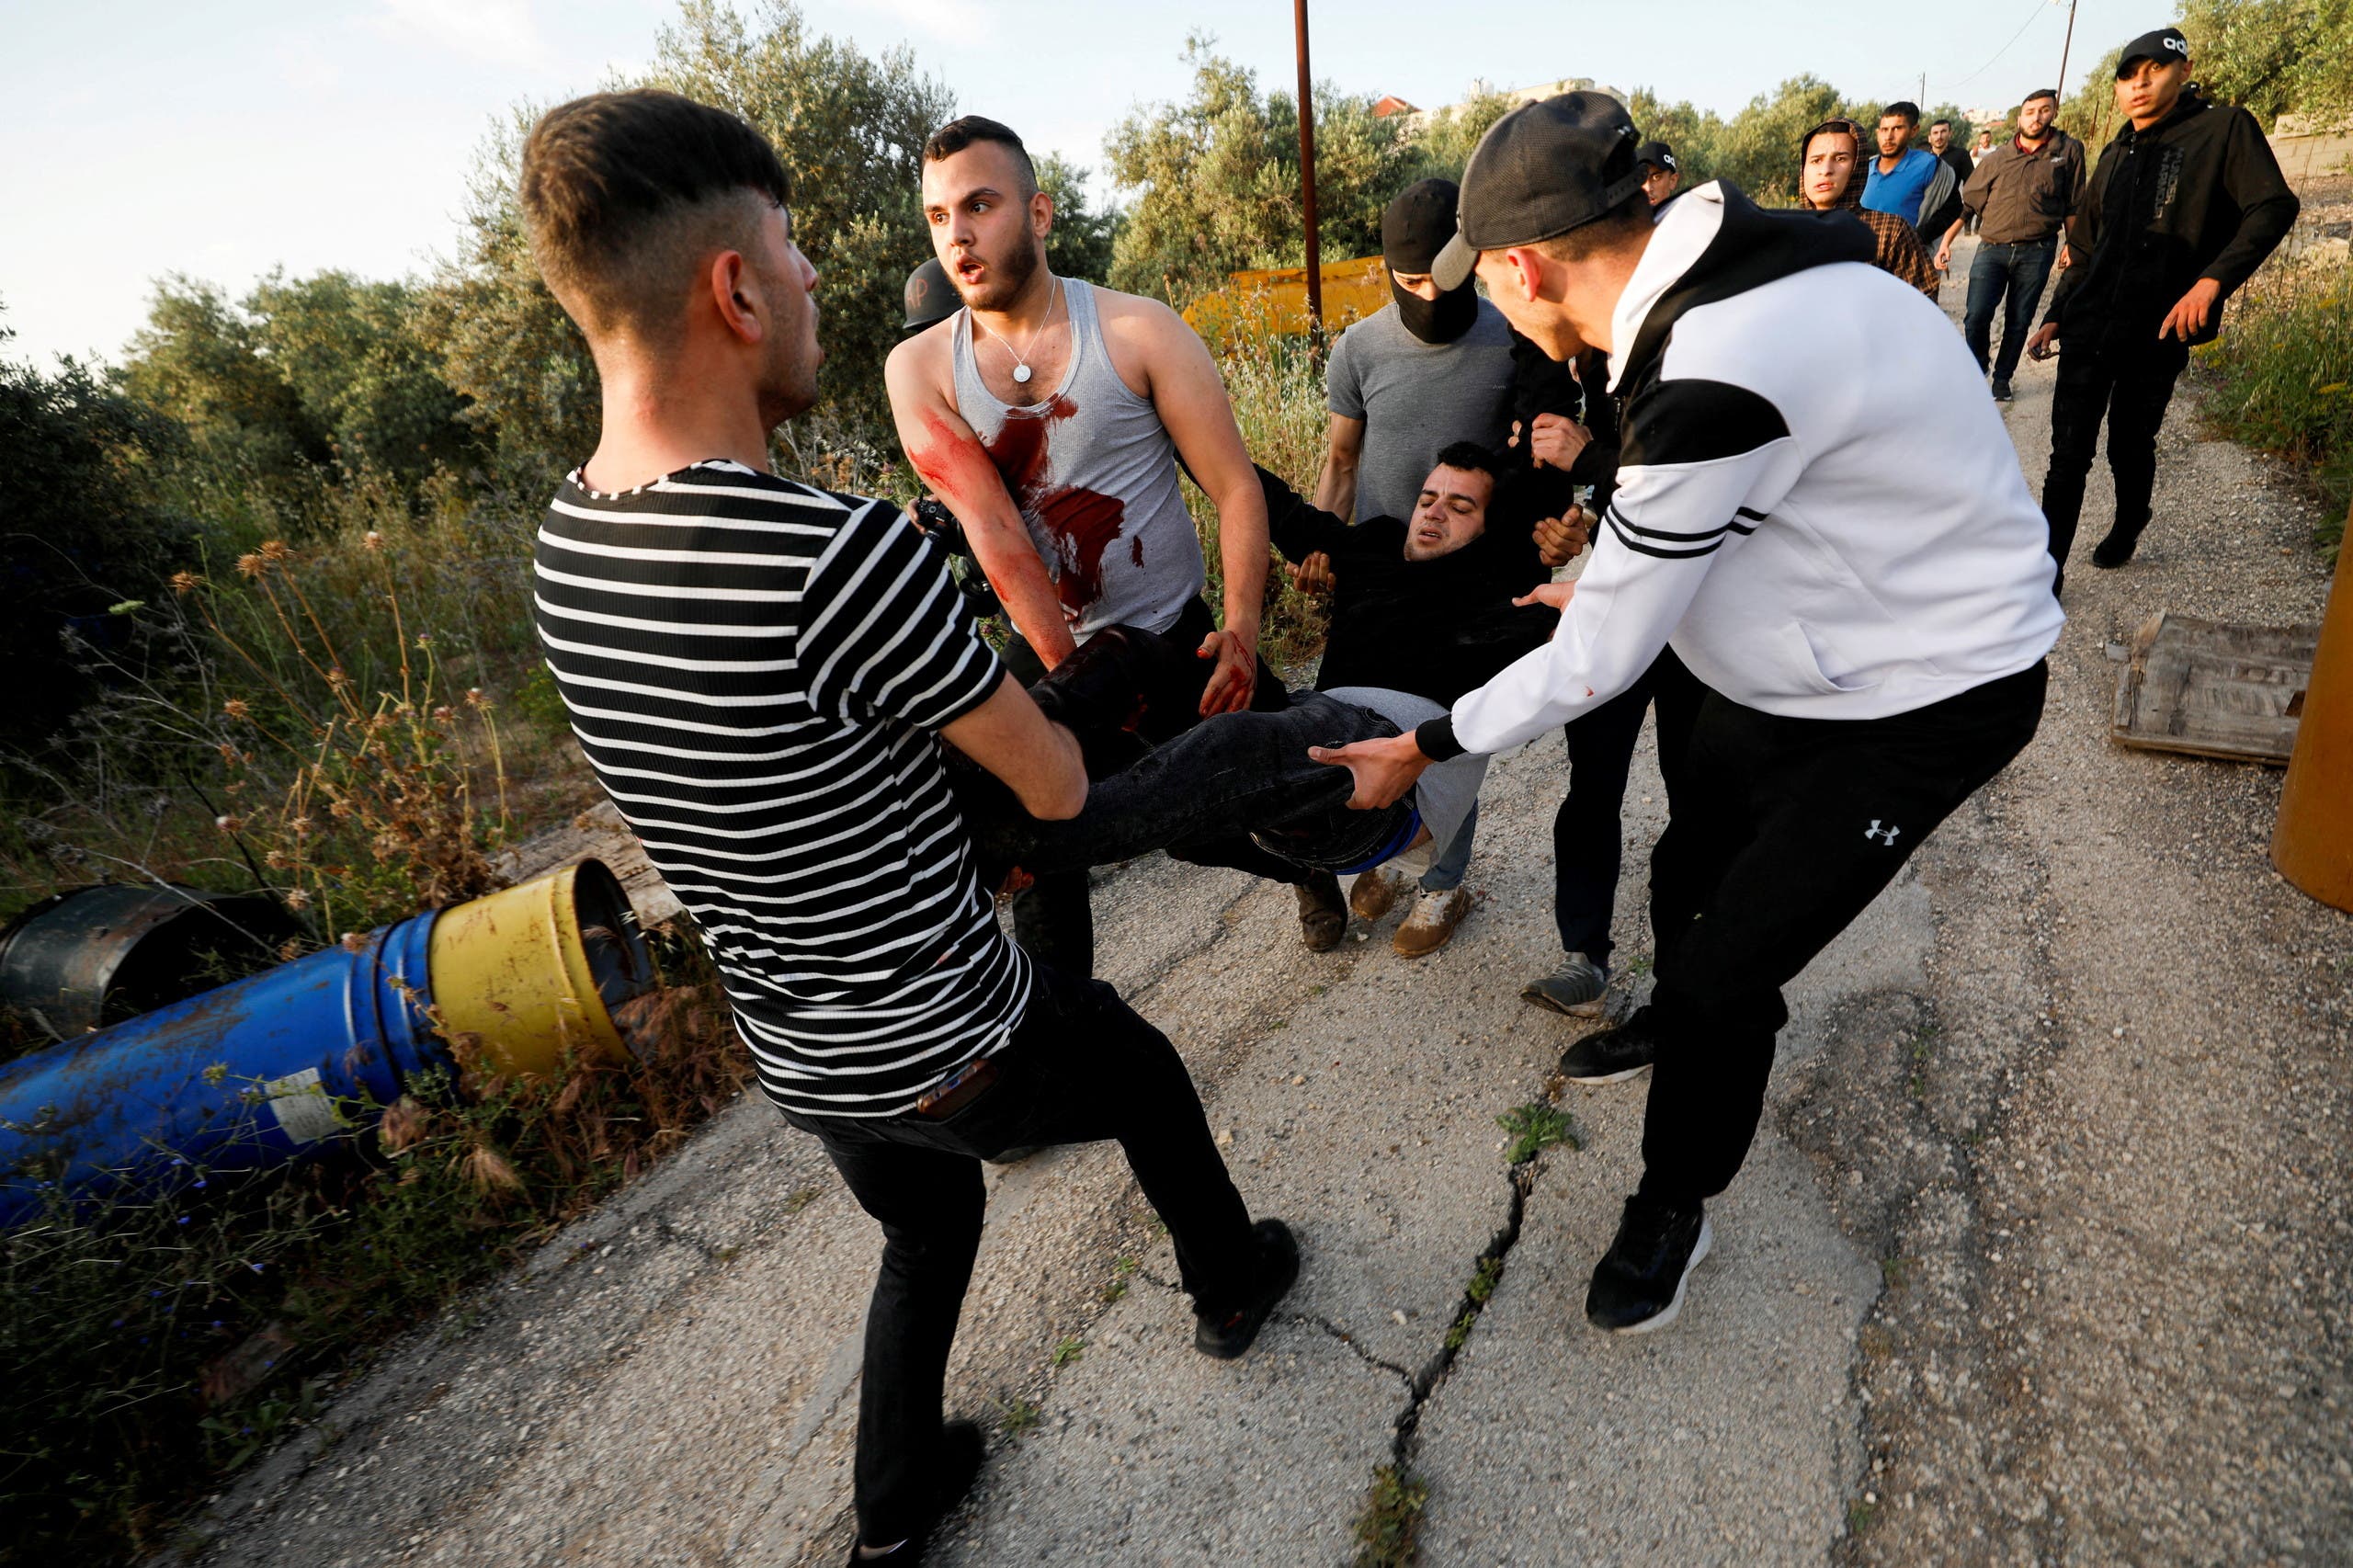 A Palestinian was injured in the clashes today near the house